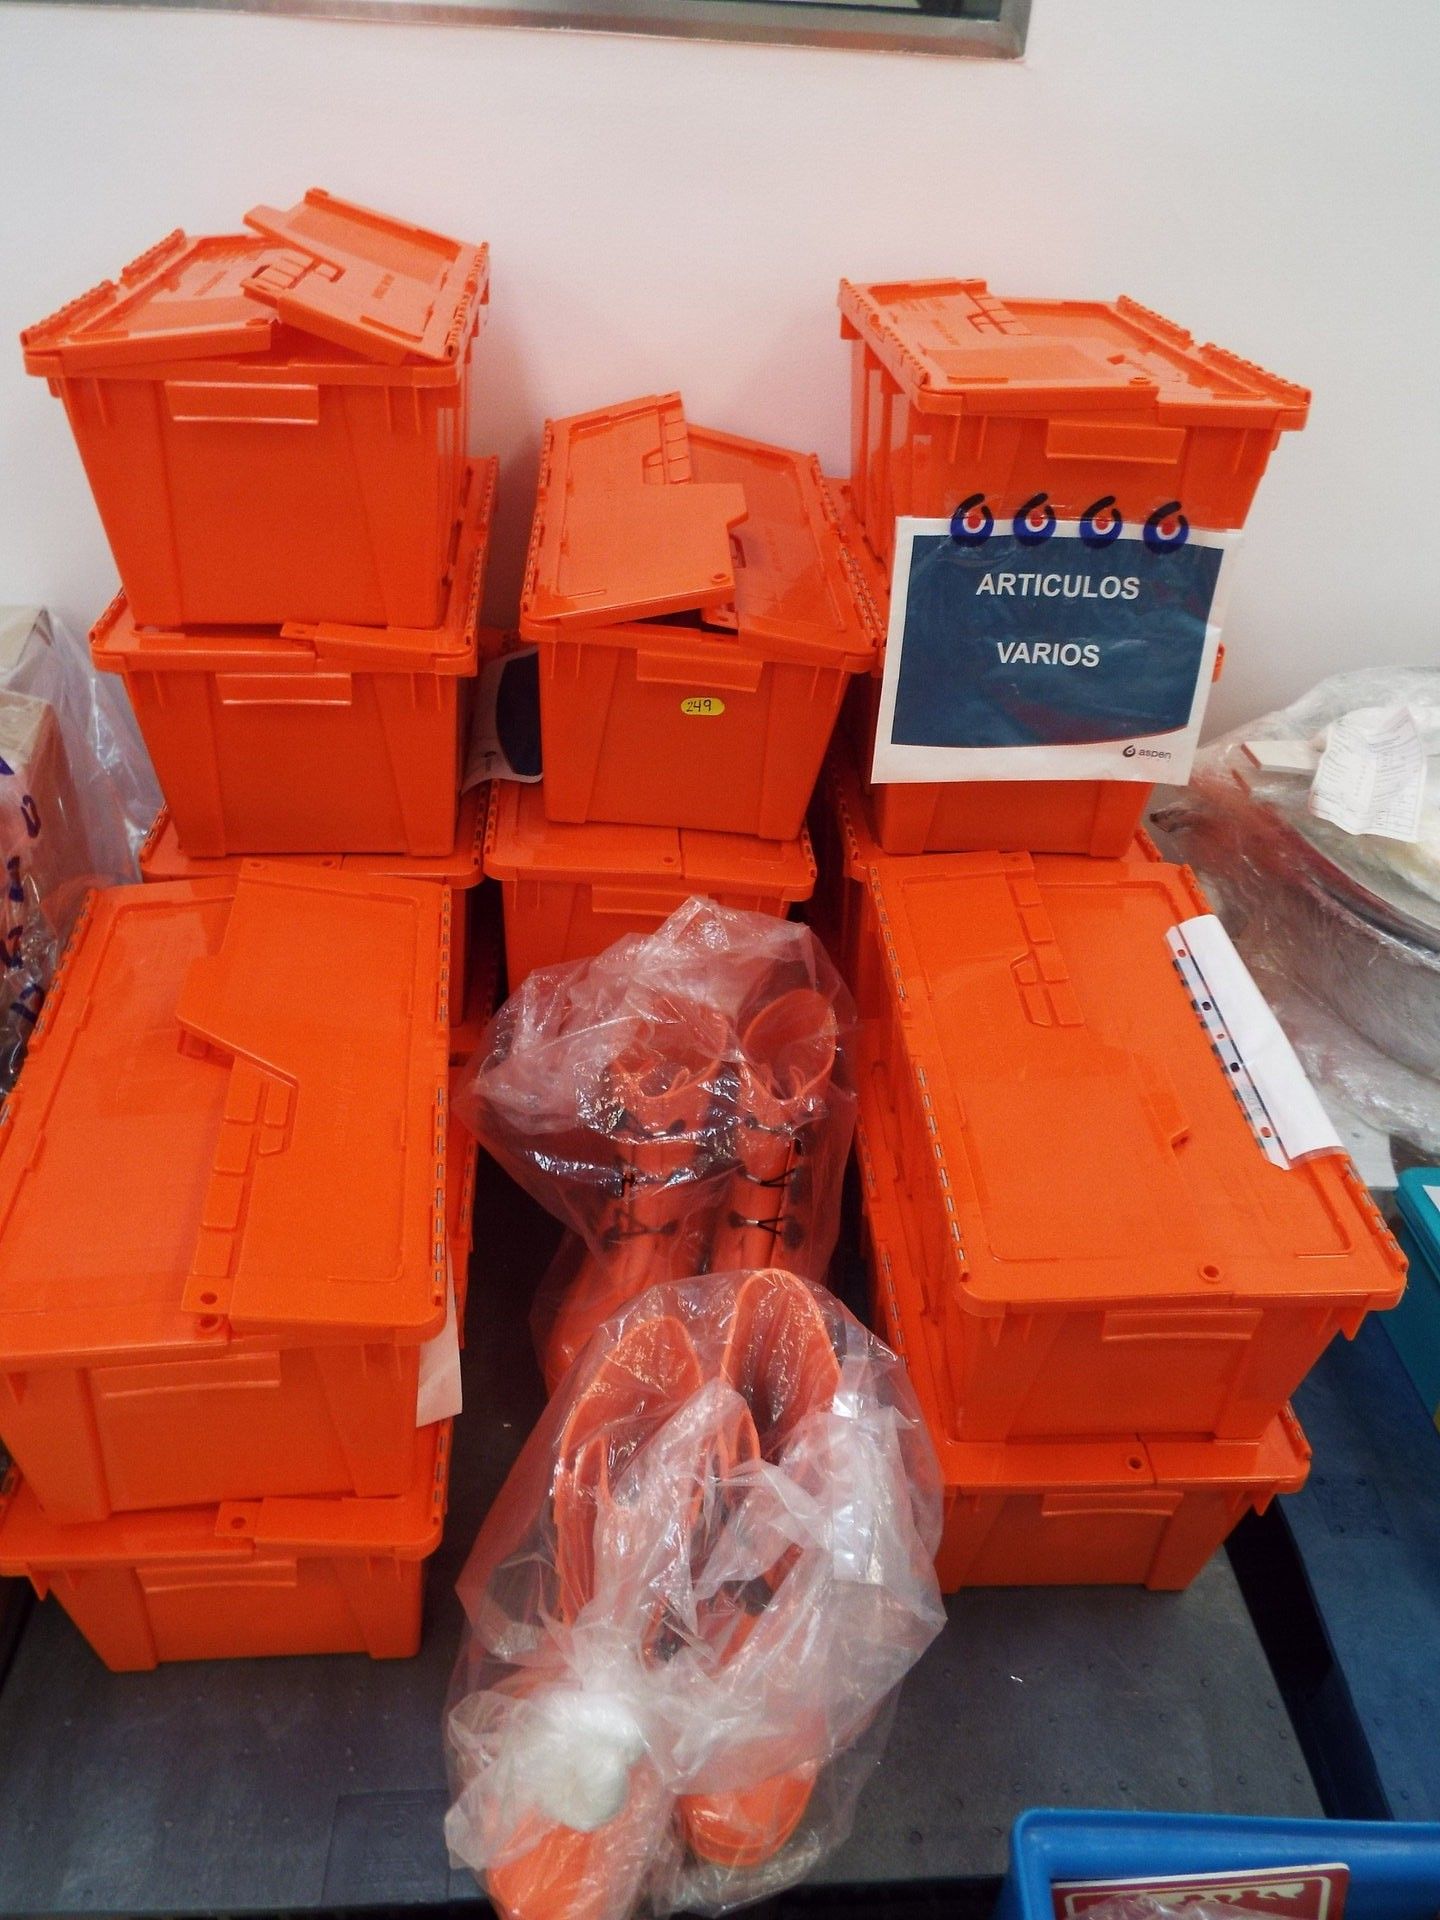 Lot of several safety devices (15 orange plastic boxes) and boots